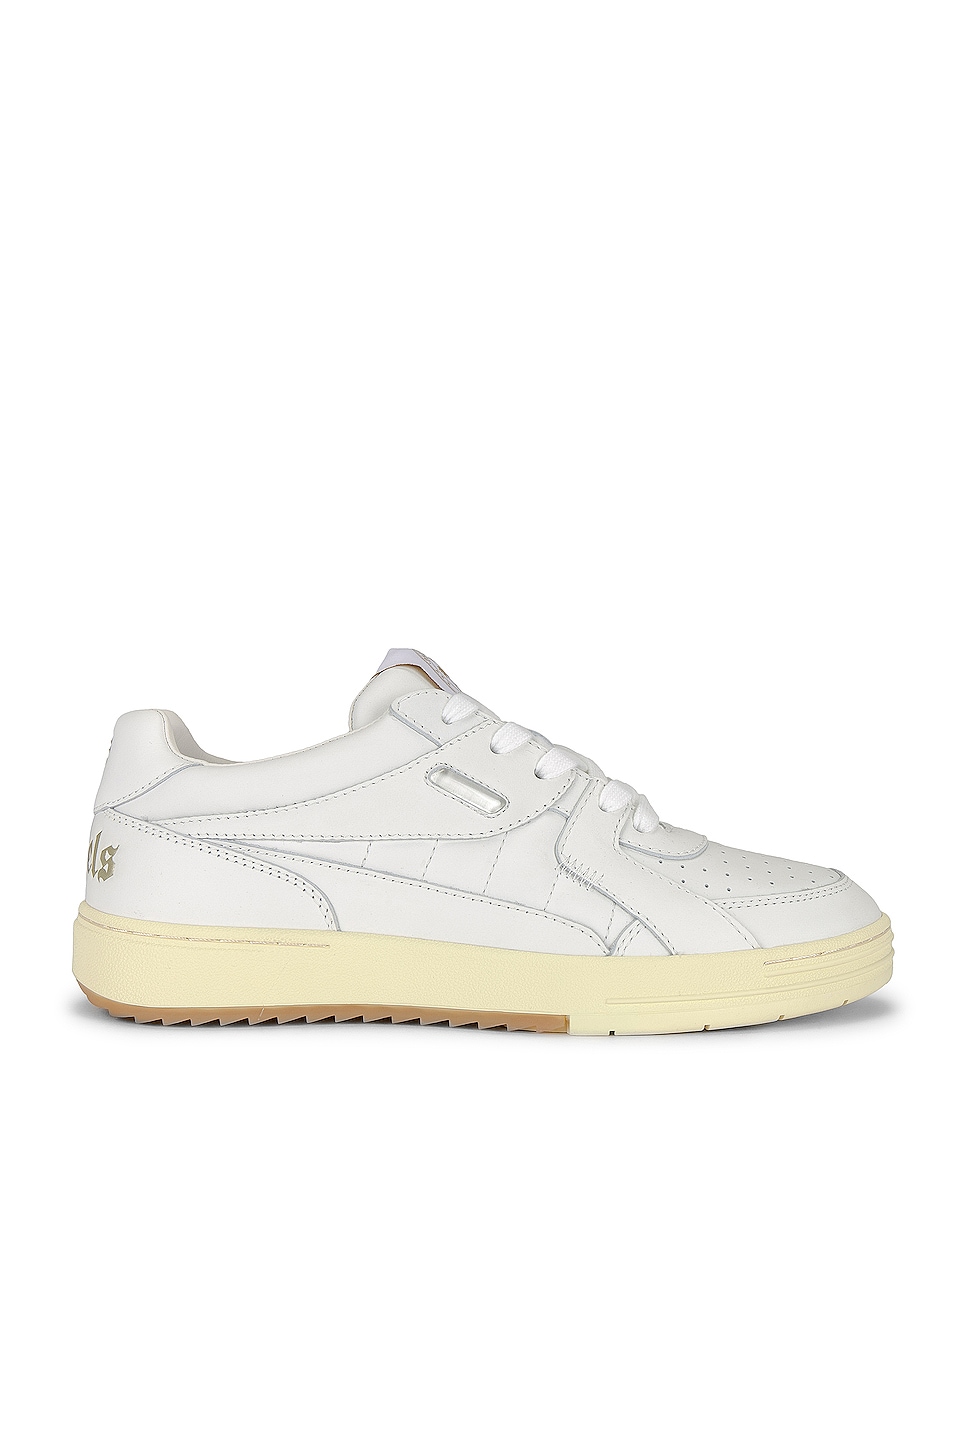 Image 1 of Palm Angels Palm University Sneaker in White